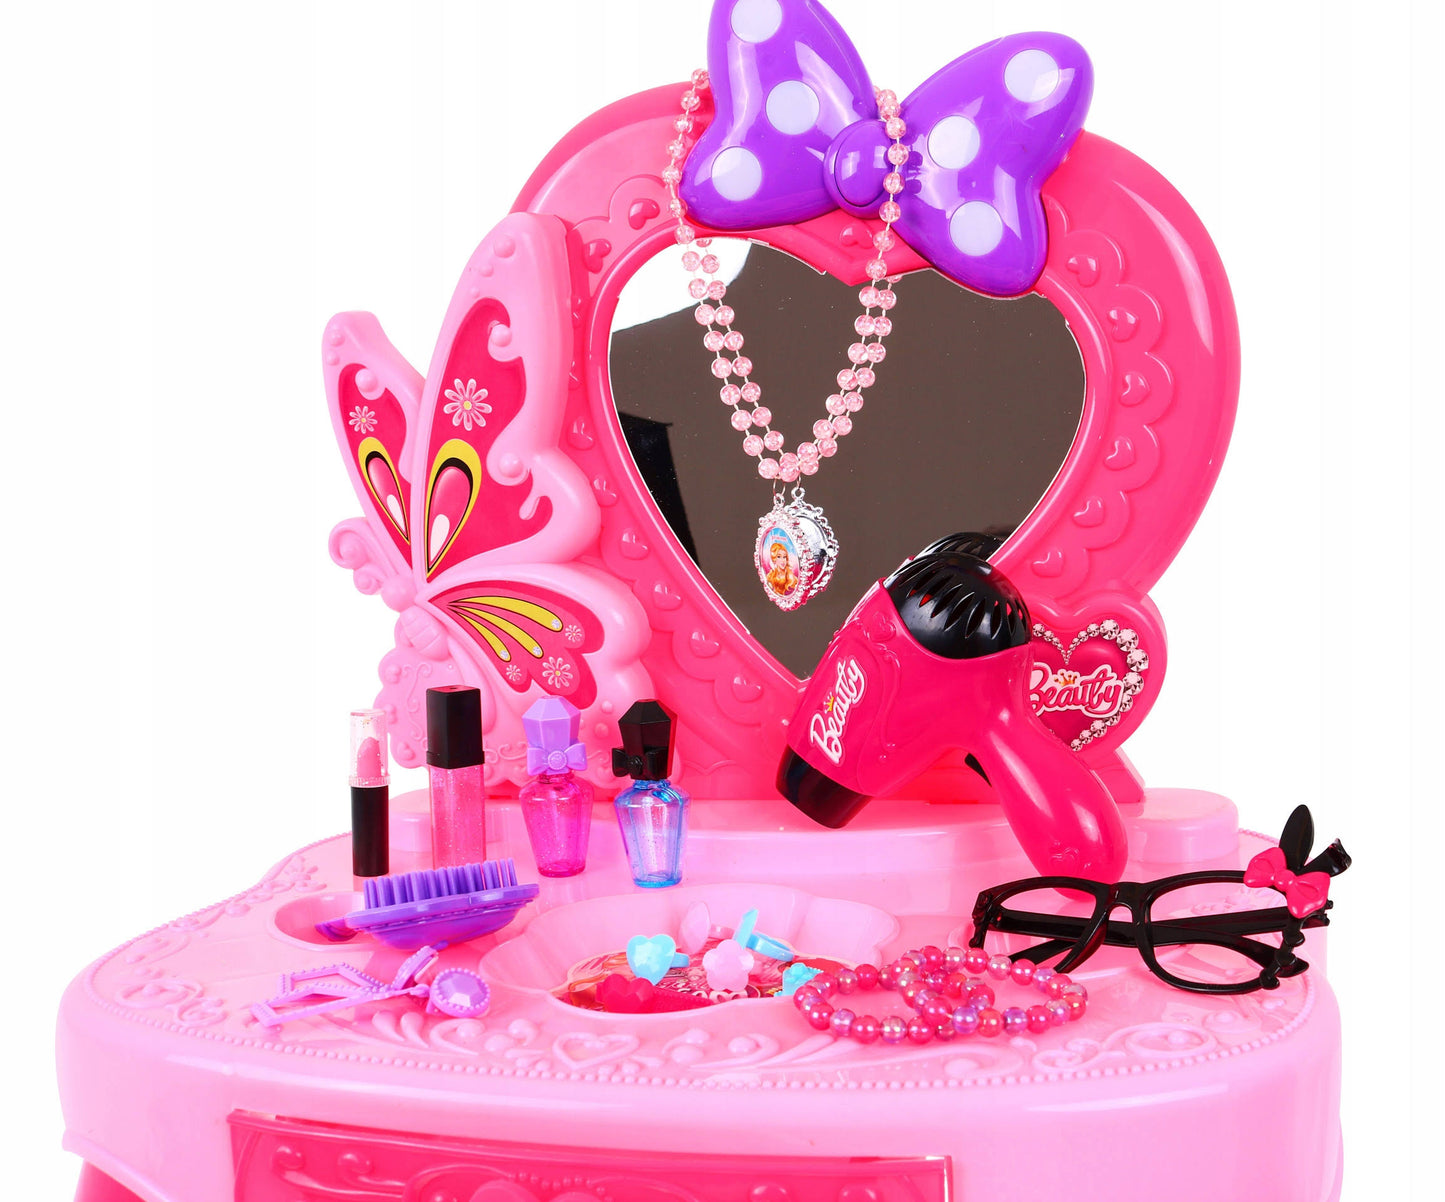 Dressing Table Playset with Light and Mirror for kids